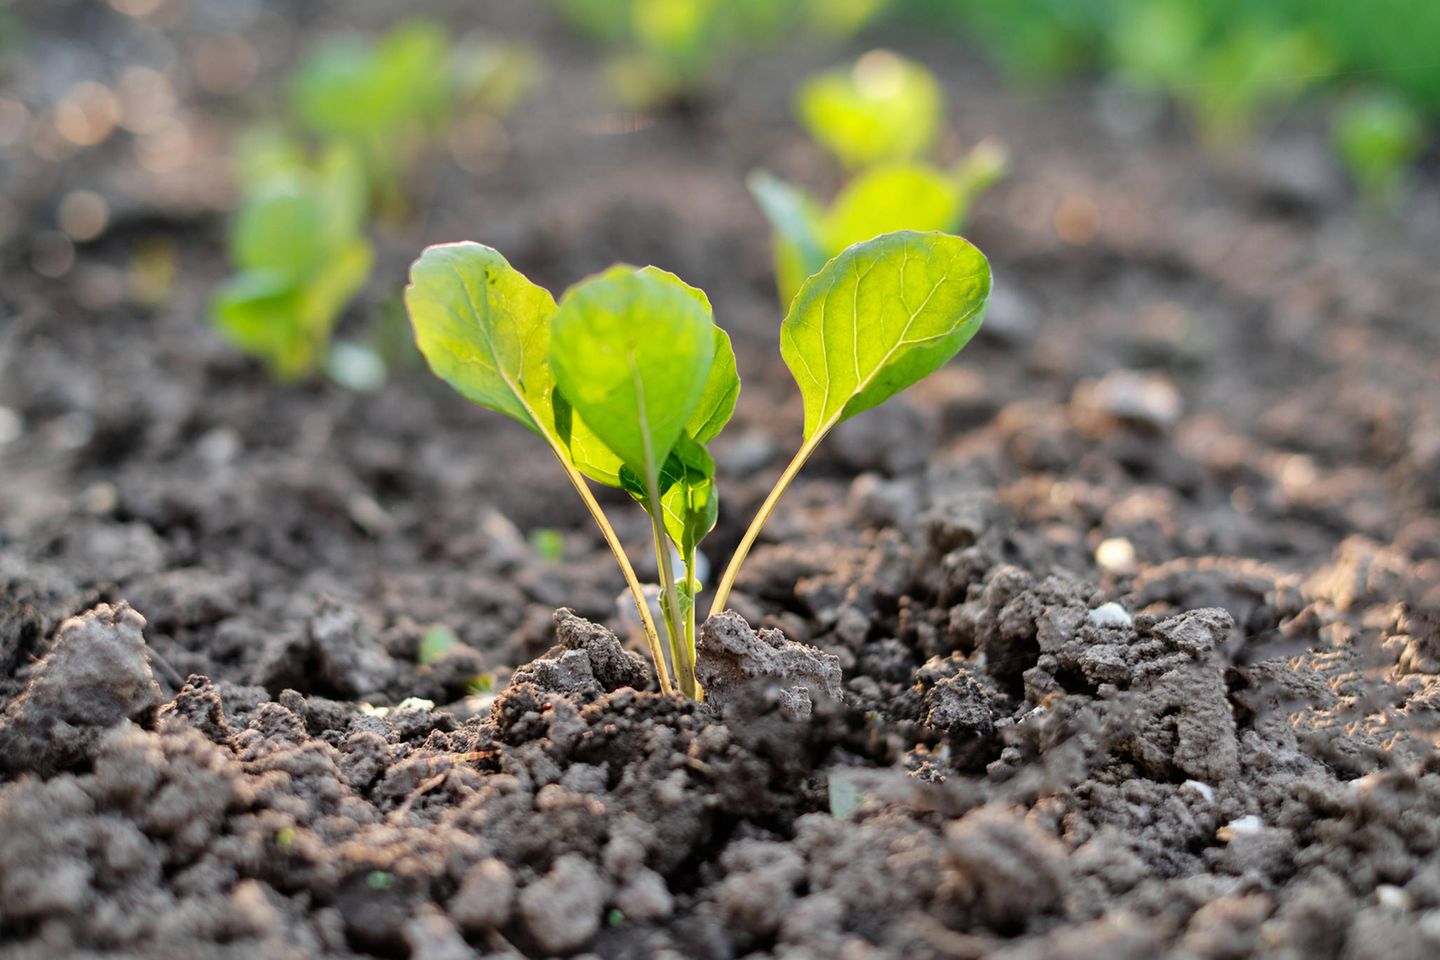 The issue of sustainability remains a tender seed in the insurance industry